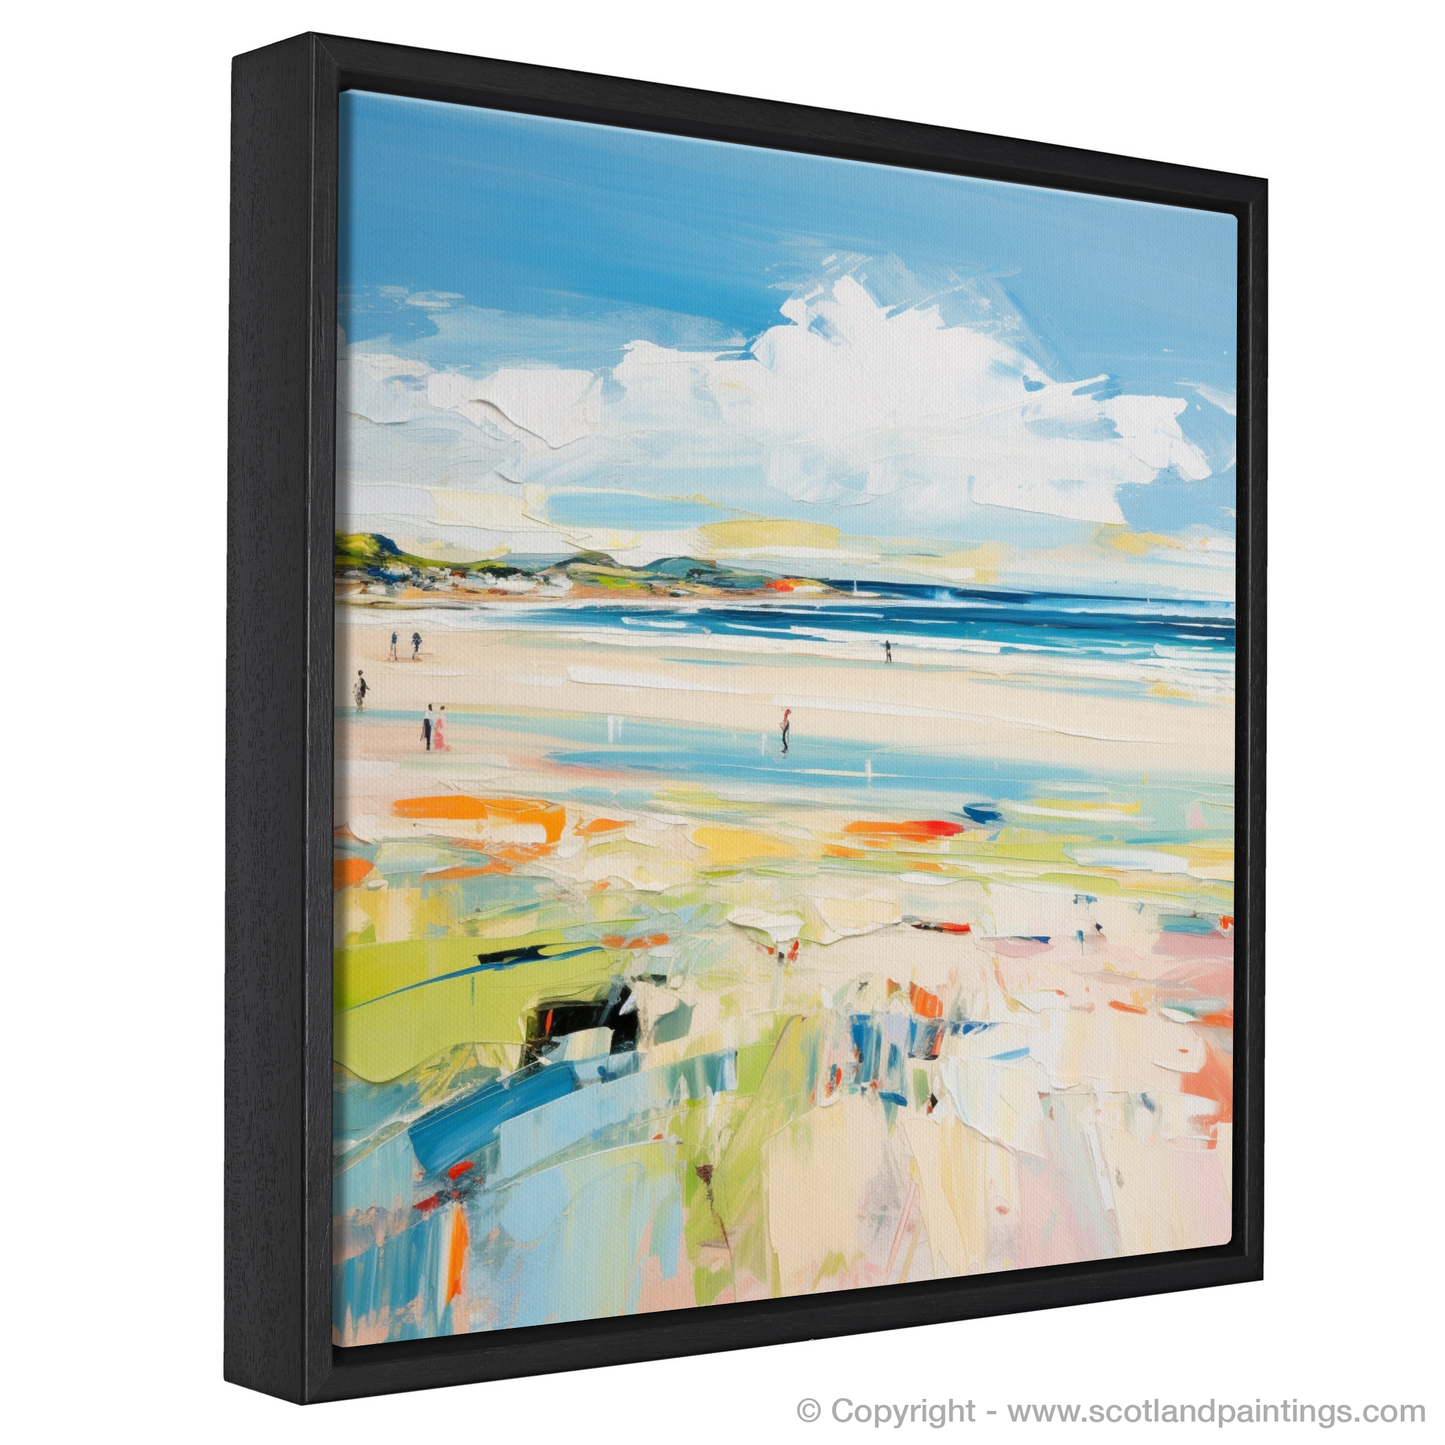 Painting and Art Print of St Cyrus Beach, Aberdeenshire in summer entitled "Summer Serenity at St Cyrus Beach".